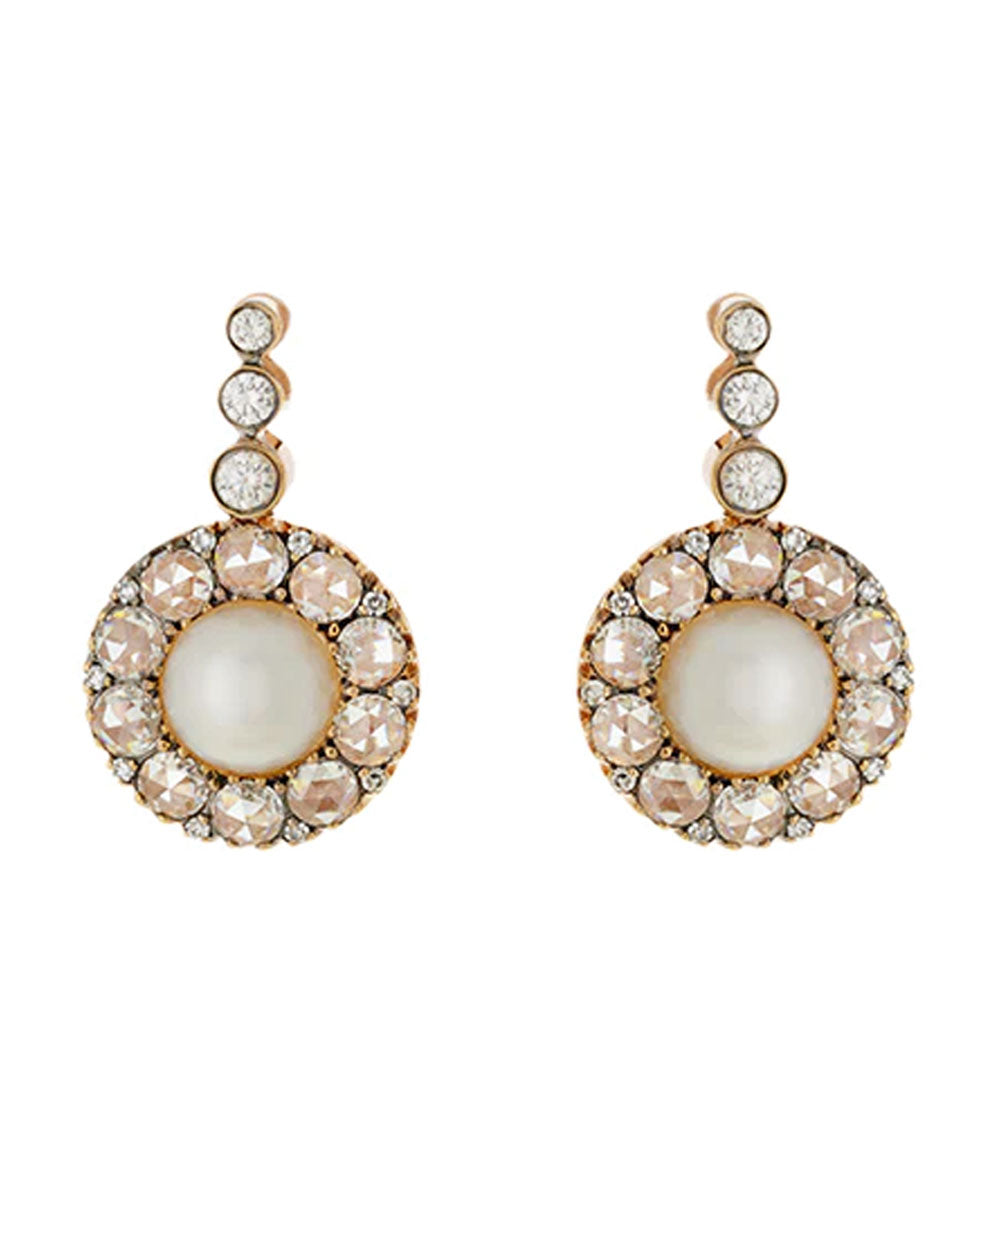 Beirut Rosace Pearl and Diamond Earrings